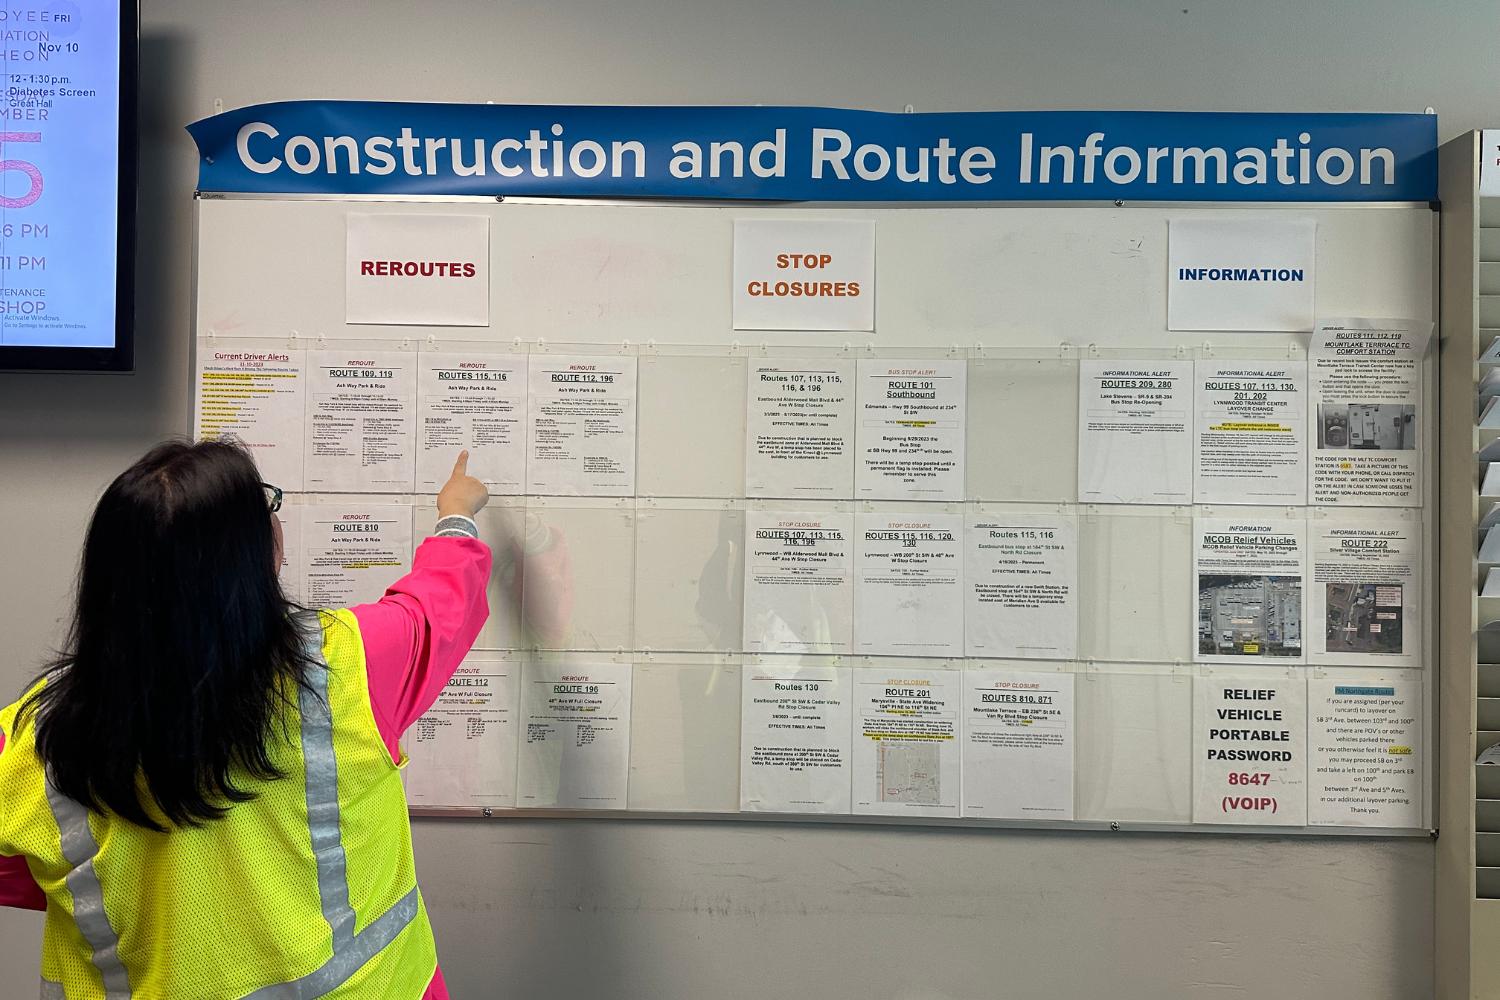 A woman in a yellow vest points out the information on the Construction and Route Information Board 